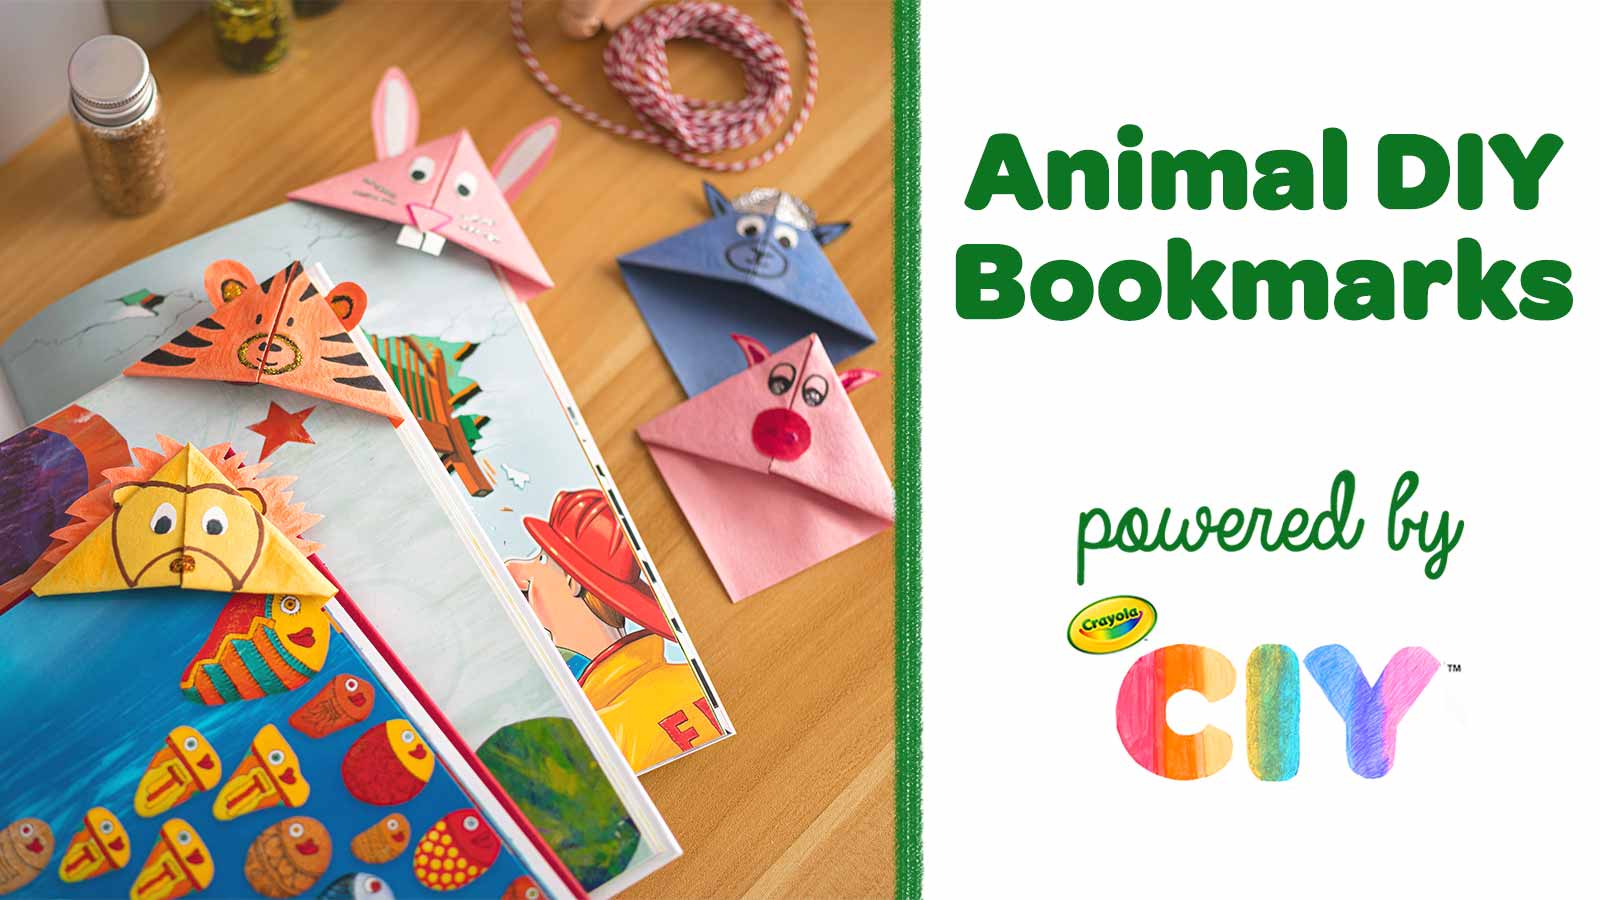 Animal DIY Bookmark for Kids, Crafts, , Crayola CIY, DIY  Crafts for Kids and Adults